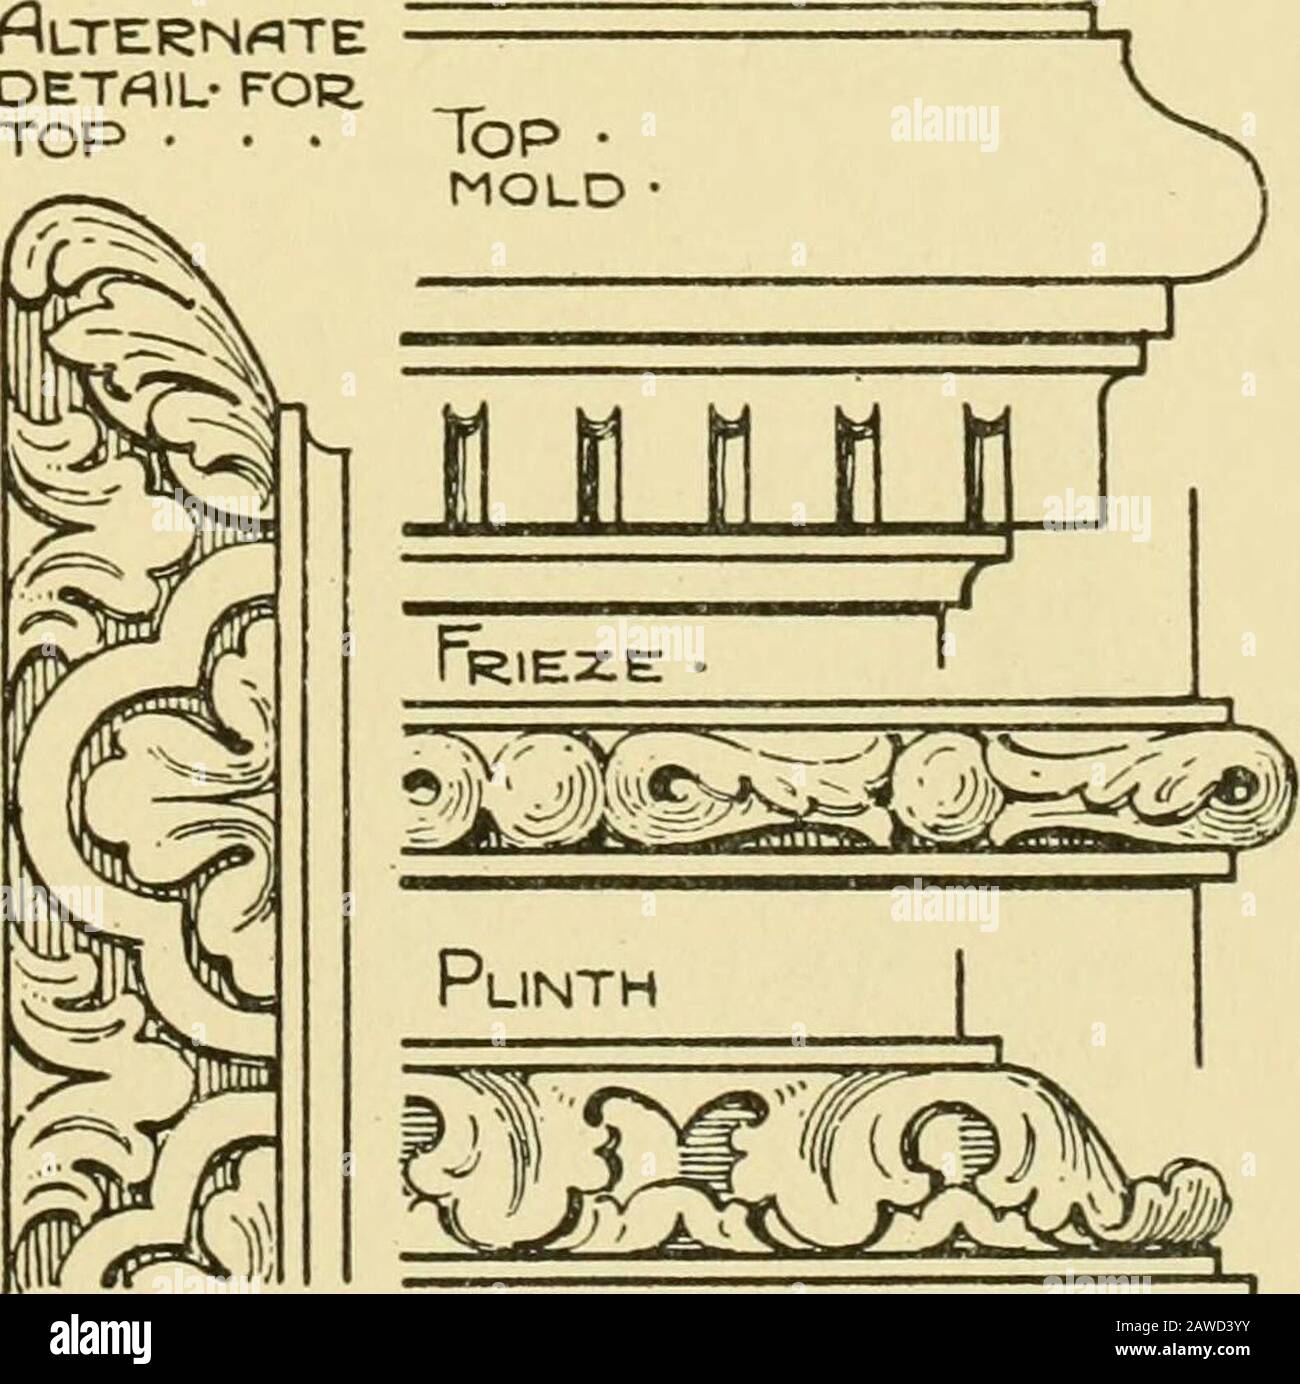 Modern cabinet work, furniture & fitments; an account of the theory & practice in the production of all kinds of cabinet work & furniture with chapters on the growth and progress of design and construction; illustrated by over 1000 practical workshop drawings, photographs & original designs . Enlarged-detail-of- pilas-ter.- carving Alternatedetail- for.  , top • • • Top. Scale- for- eleva- TION- (AND- PLAN • • 2. iter-. I I II I II I I c A Chippendale Writing Table. r2o MODERN CABINETWORK, FURNITURE, AND FITMENTS The sectional plan shows the method of framing up the ends, essential in sucha he Stock Photo